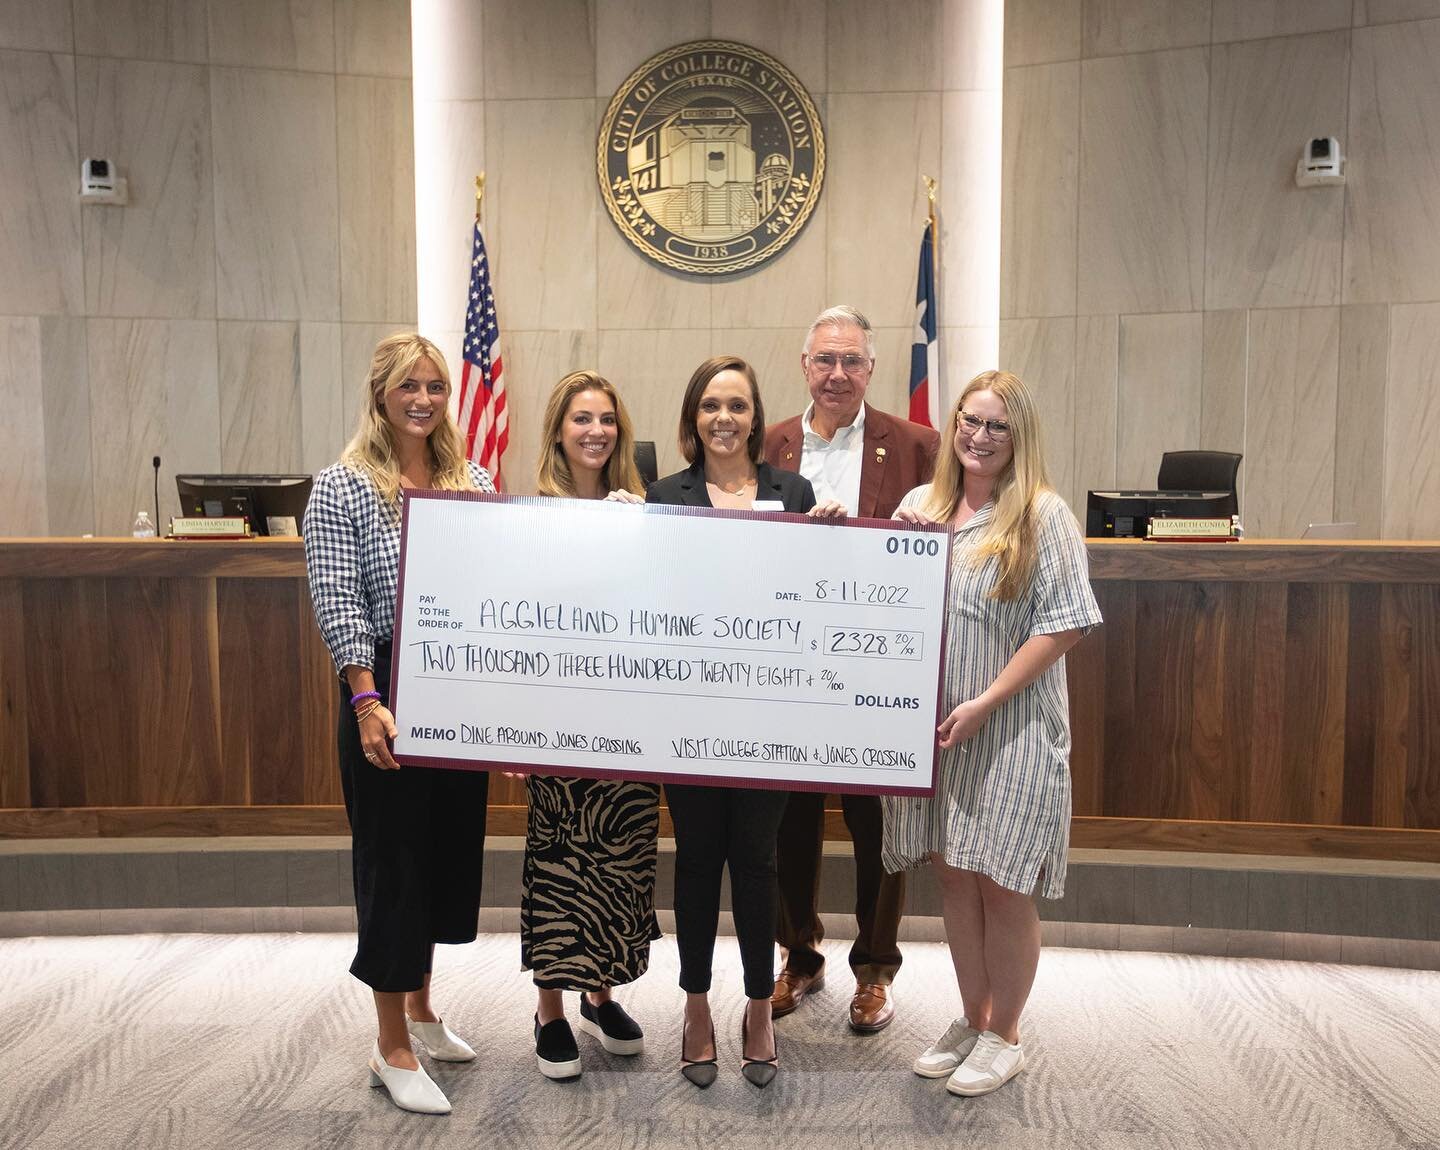 Thank you to Mayor Mooney and the City Council for hosting us yesterday! We had the opportunity to present 1. A recap on Dine Around with our partner @visitcstx and 2. A check to @aggielandhumane with the event proceeds! Your tickets went directly to